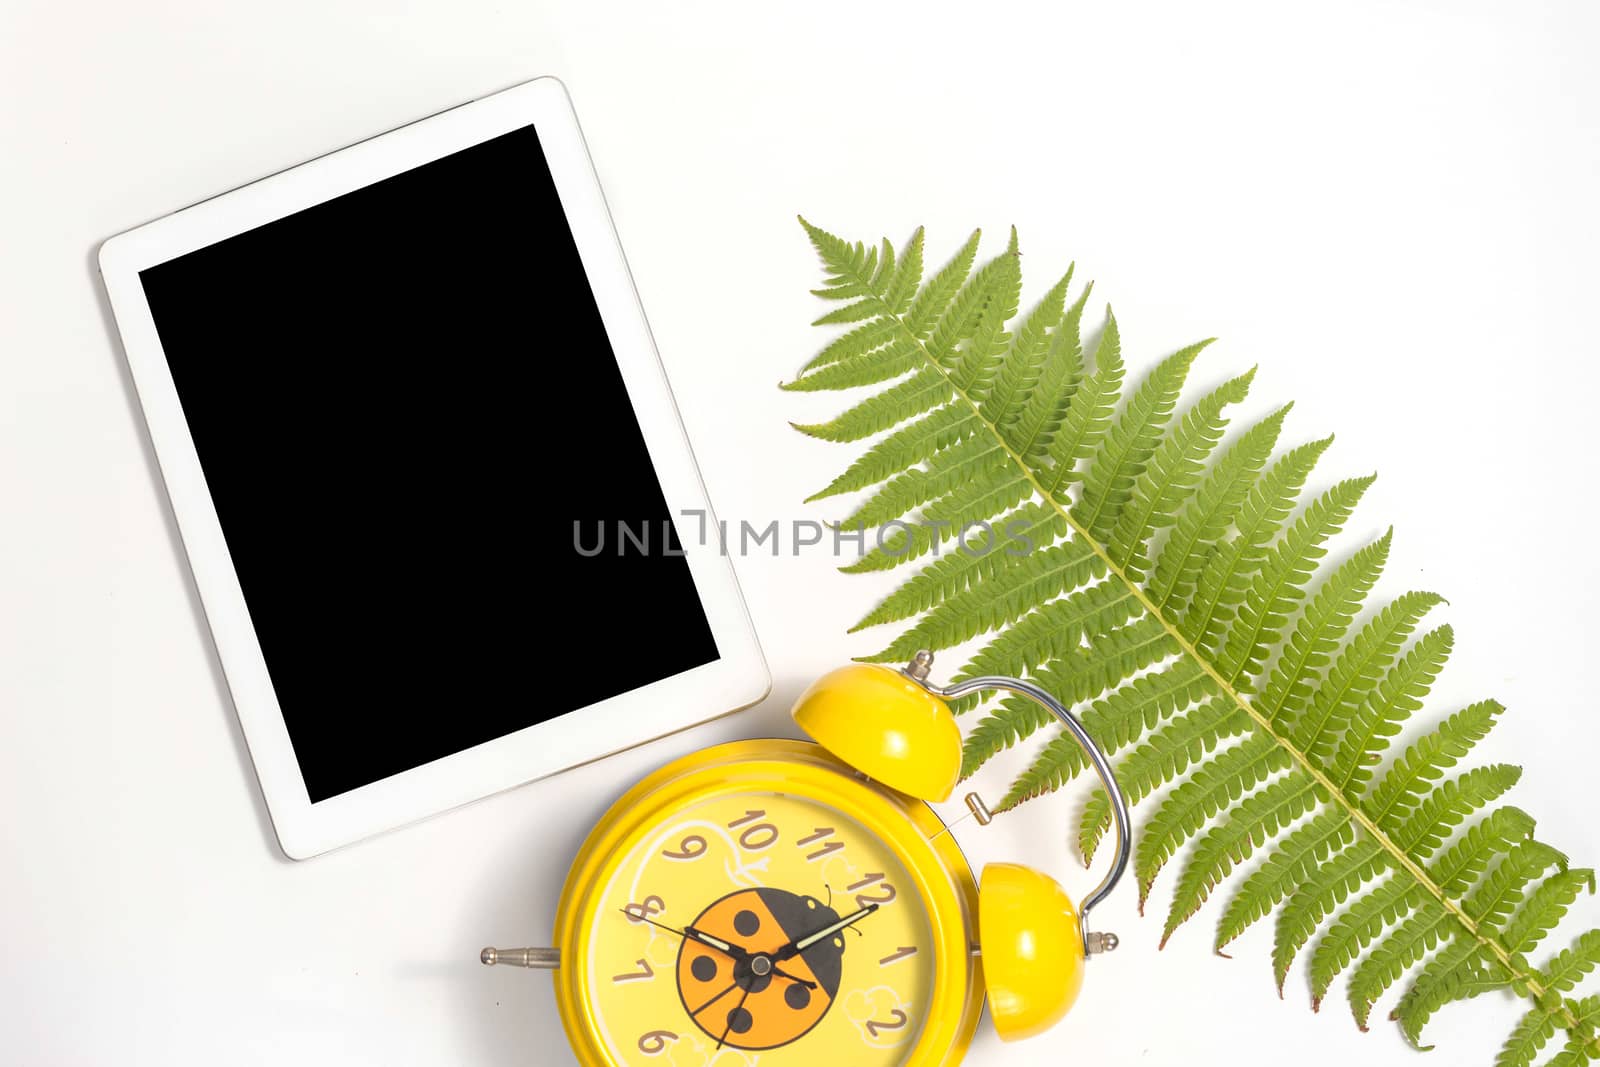 White tablet and white whalnut leaf on gray background. Flat lay, top view, copy space.